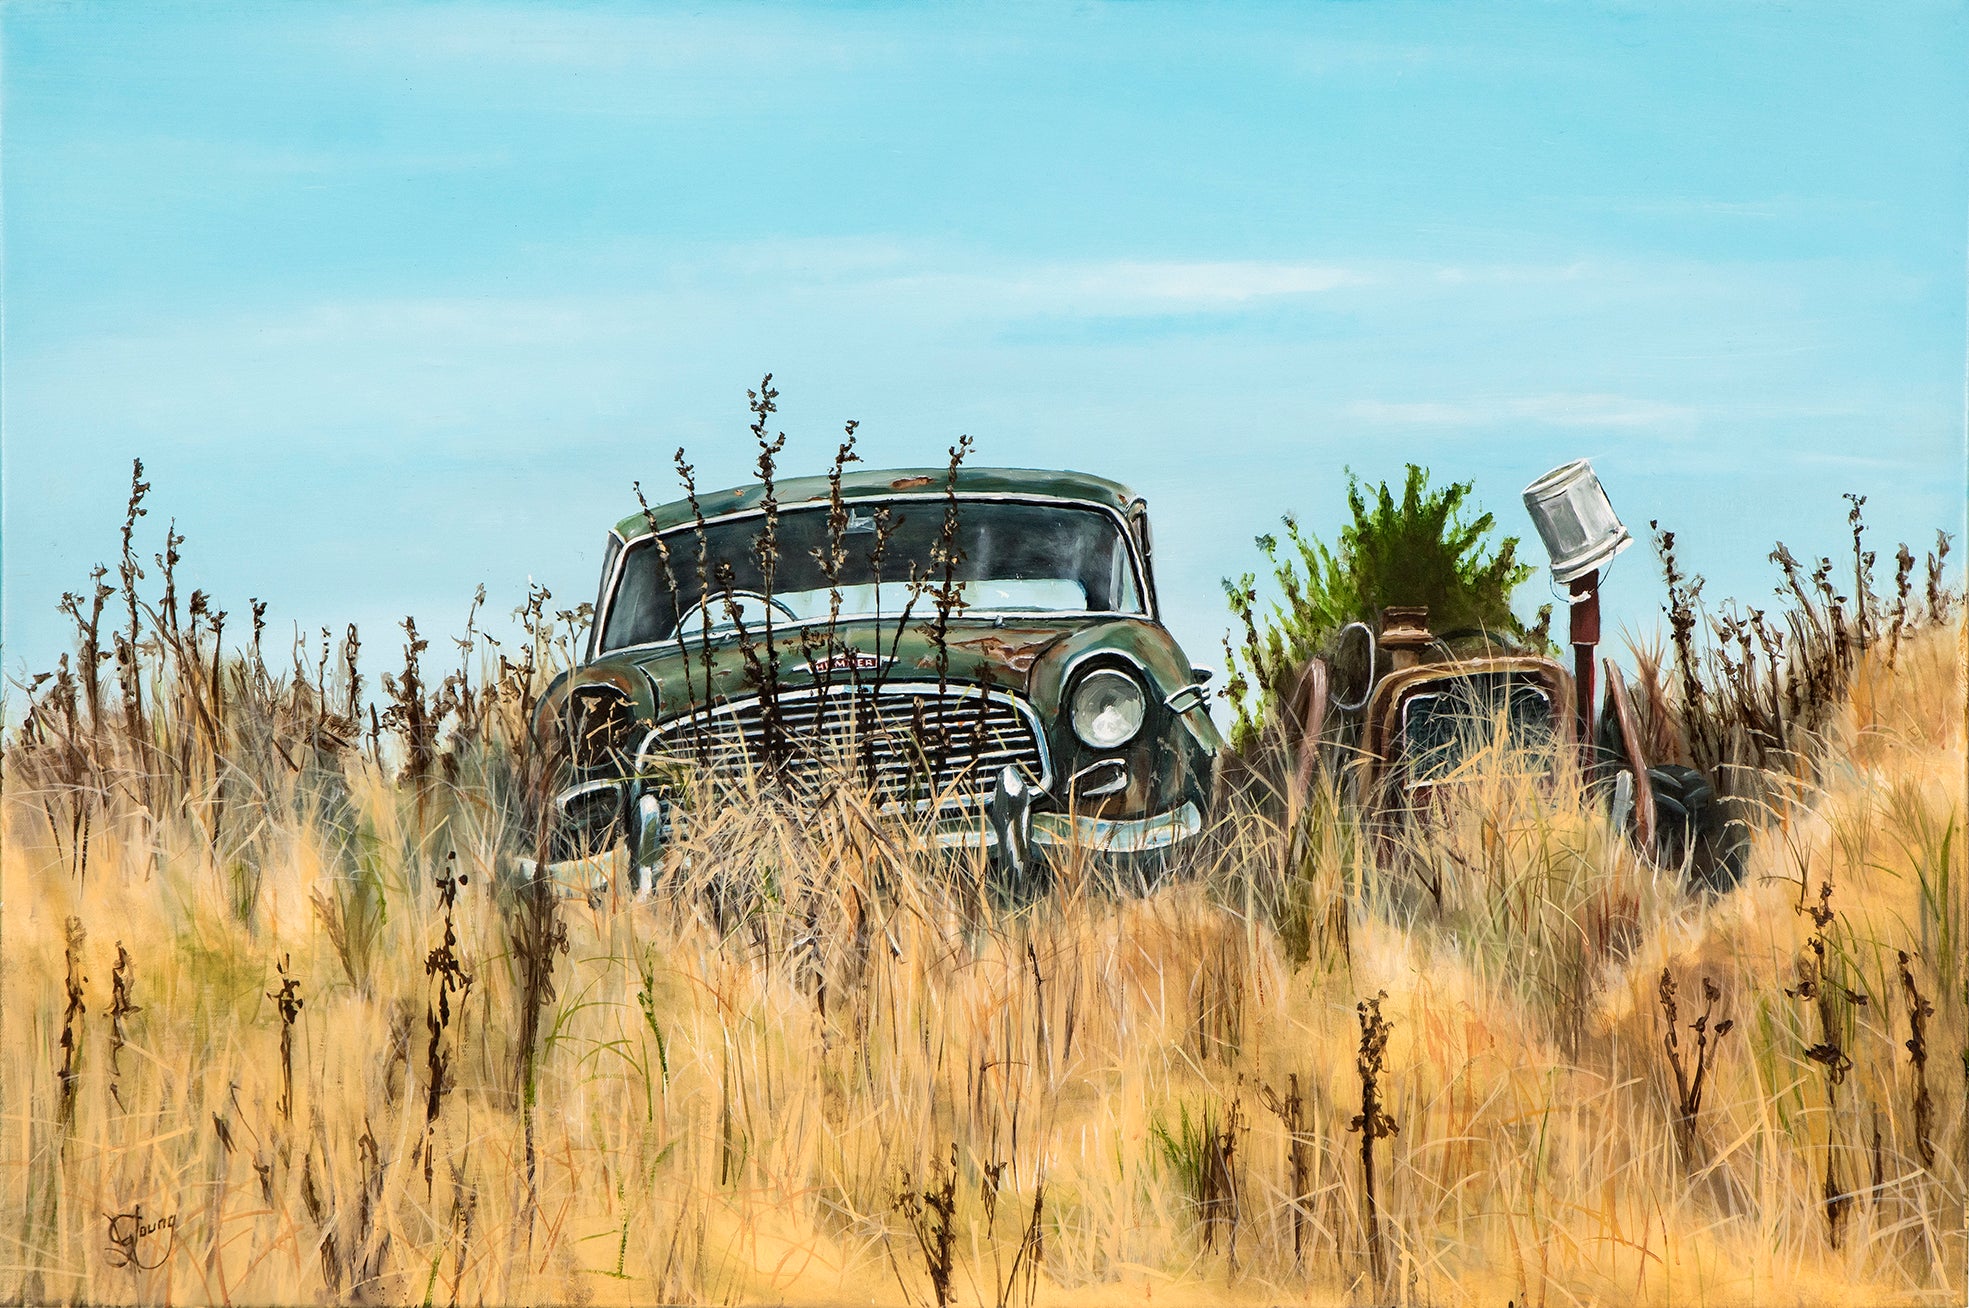 Wrecked Humber in Slumber - grahamyoungartist.com - Original Artwork and Prints by New Zealand Artist Graham Young